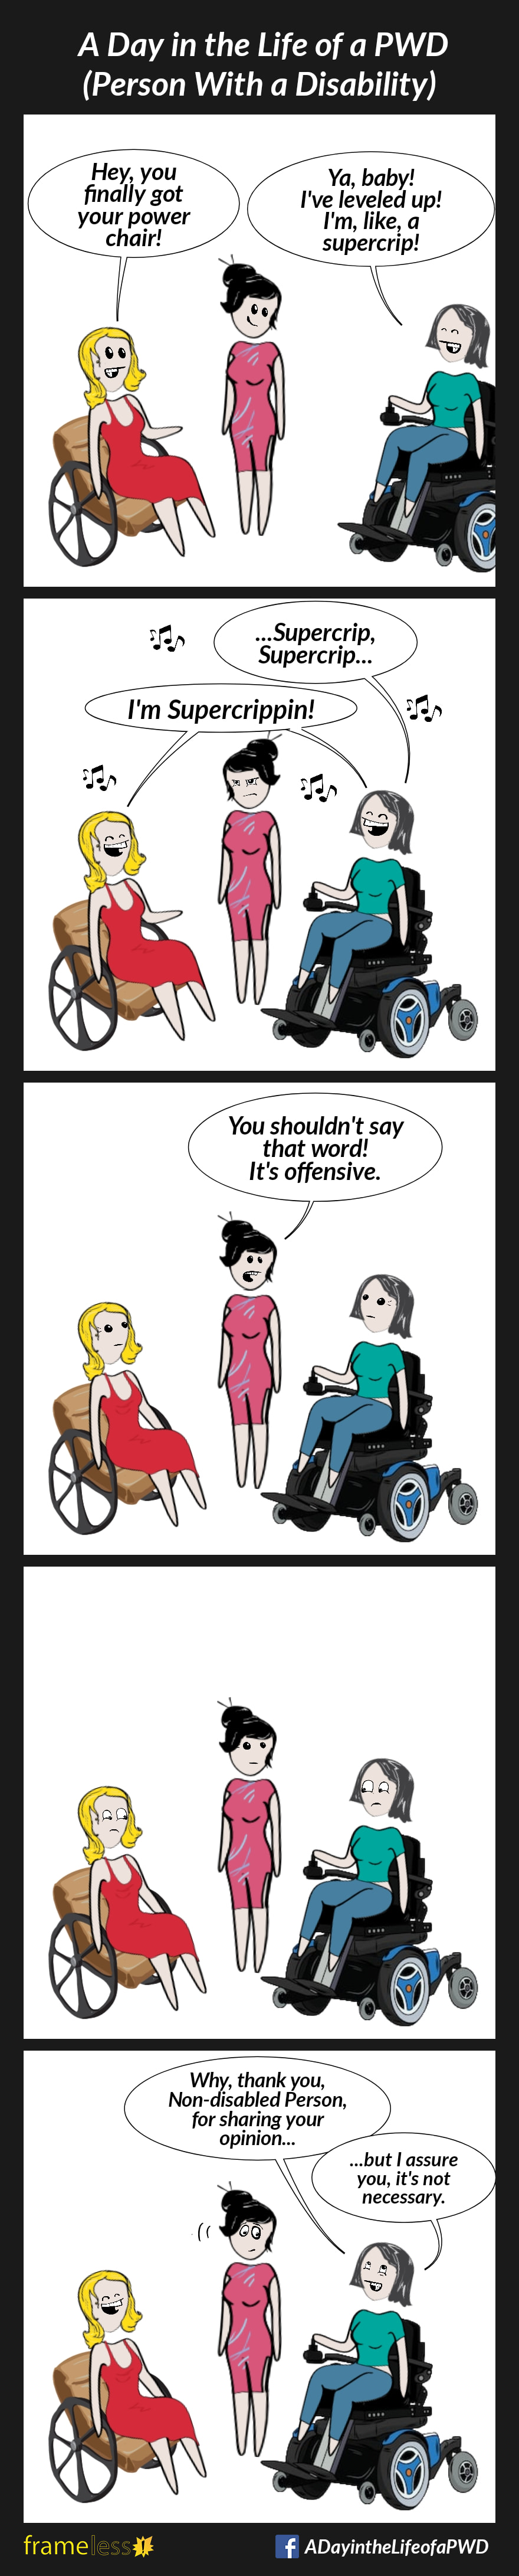 COMIC STRIP 
A Day in the Life of a PWD (Person With a Disability) 

Frame 1:
A woman in a manual wheelchair is chatting with a non-disabled acquaintance. Her friend arrives using a power wheelchair. 
WOMAN: Hey, you finally got your power chair!
FRIEND: Ya, baby! I've leveled up! I'm,  like, a supercrip!

Frame 2:
FRIEND (starts singing): ...Supercrip, Supercrip...
WOMAN (joining in): I'm supercrippin!
The acquaintance looks at them, irritated.

Frame 3:
ACQUAINTANCE: You shouldn't say that word! It's offensive. 

Frame 4:
The woman and her friend look at each other.

Fame 5:
FRIEND (rolling her eyes): Why, thank you, Non-disabled Person, for sharing your opinion...but I assure you, it's not necessary.
The woman laughs.